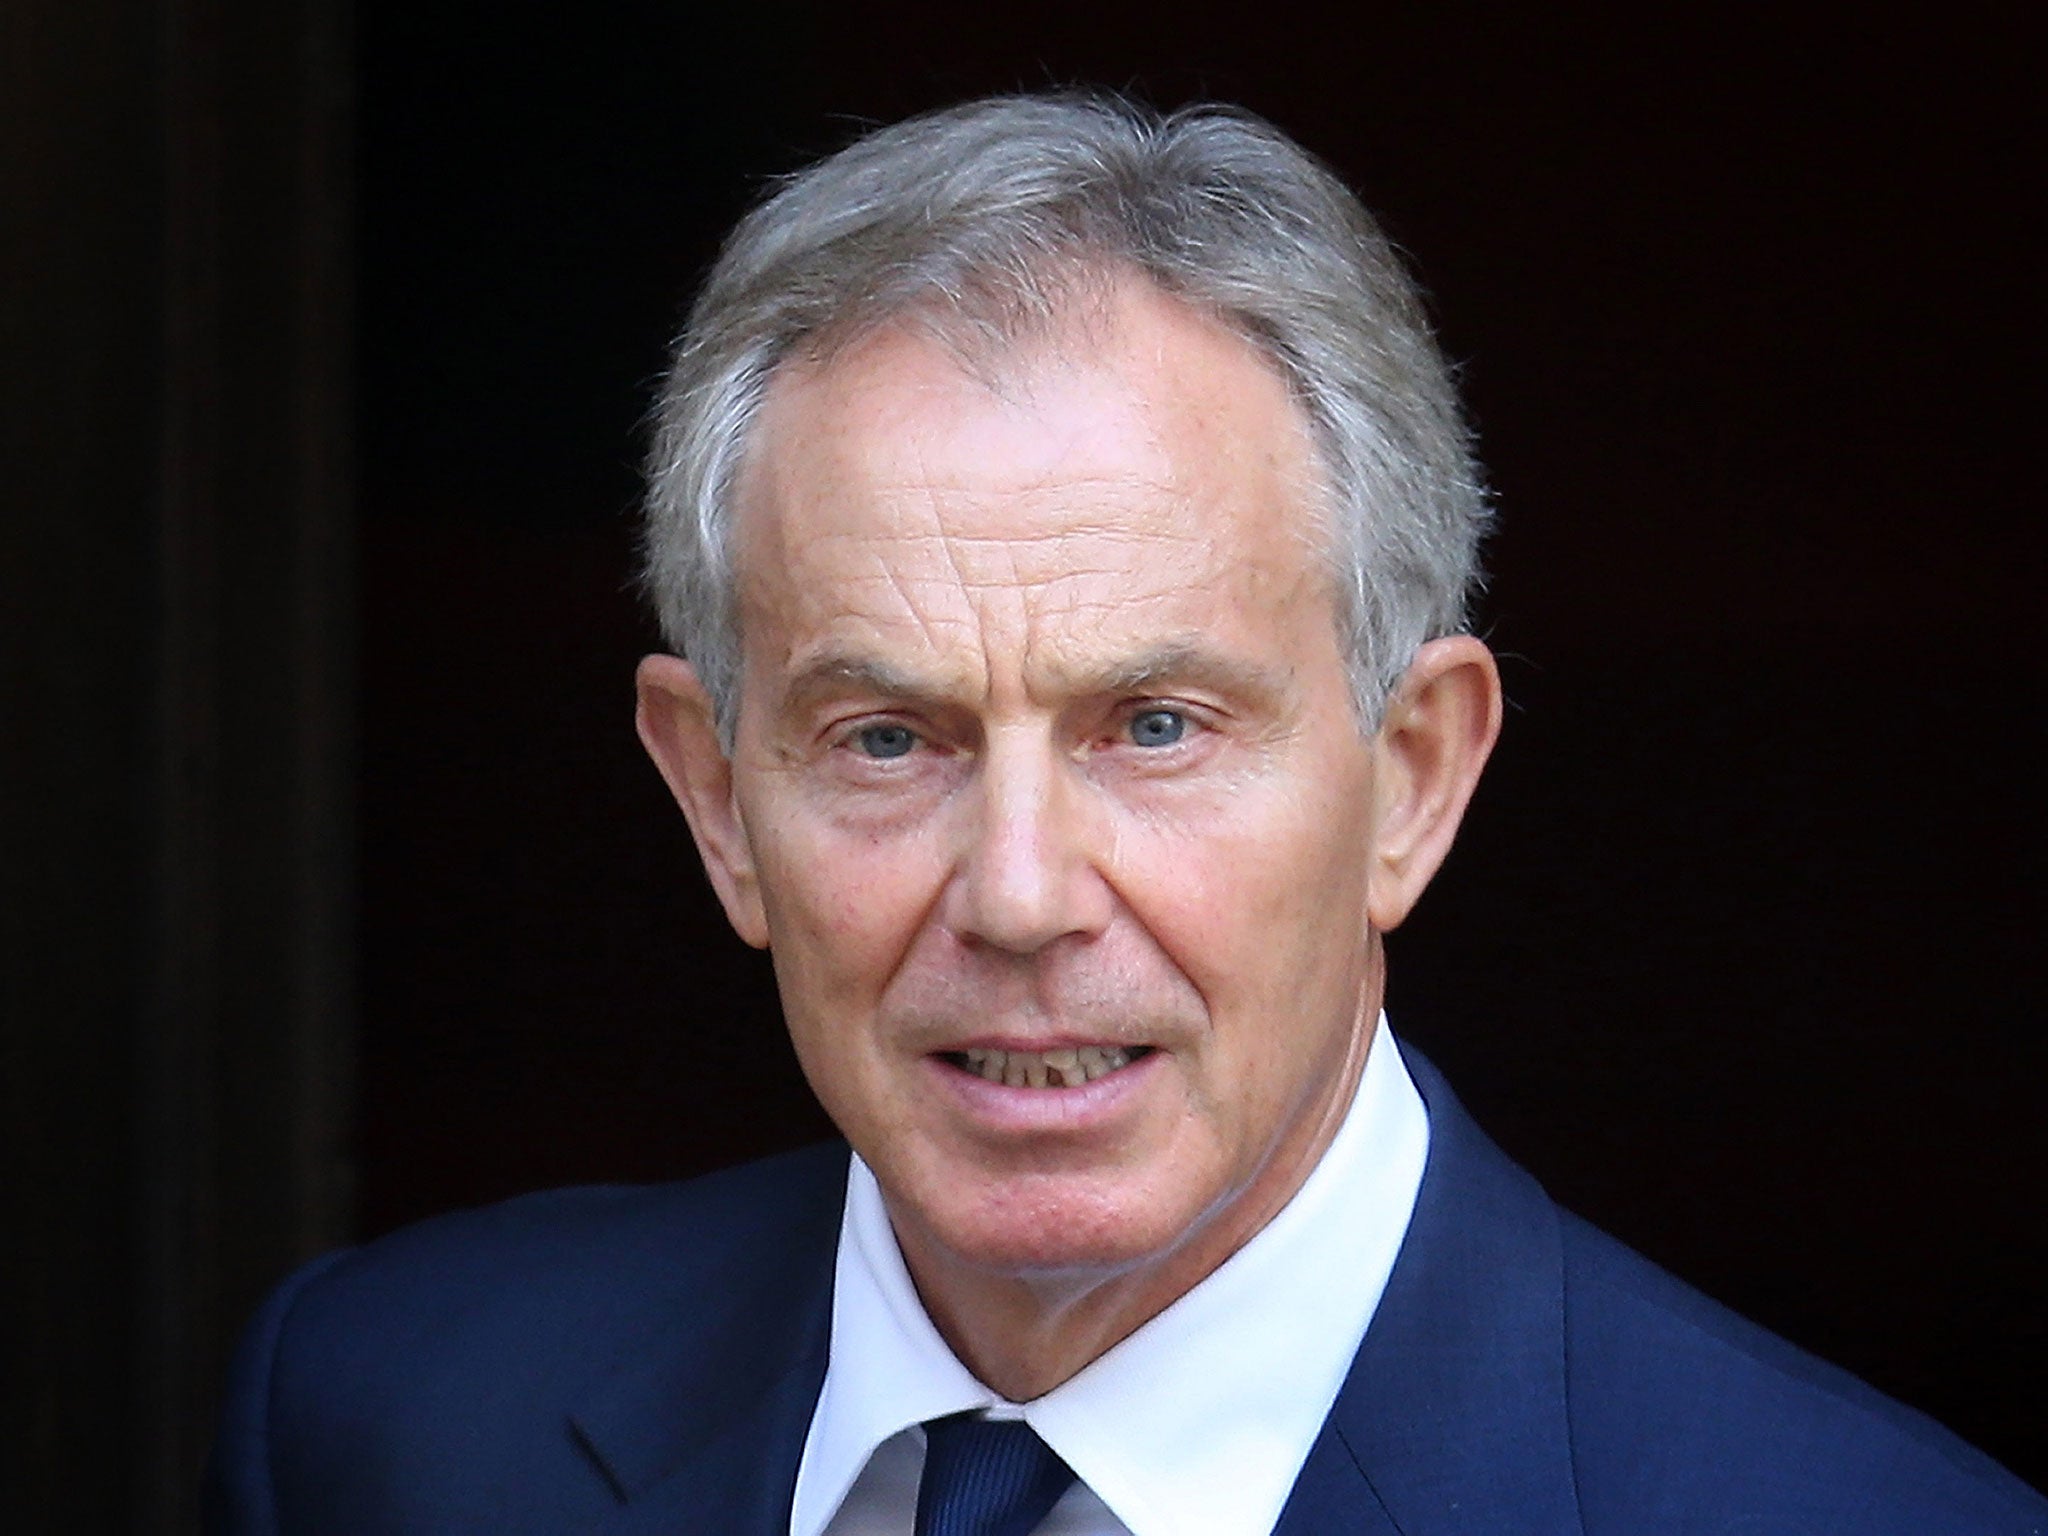 Blair says the idea that sending troops to Iraq led directly to the current situation in the country is "bizarre"